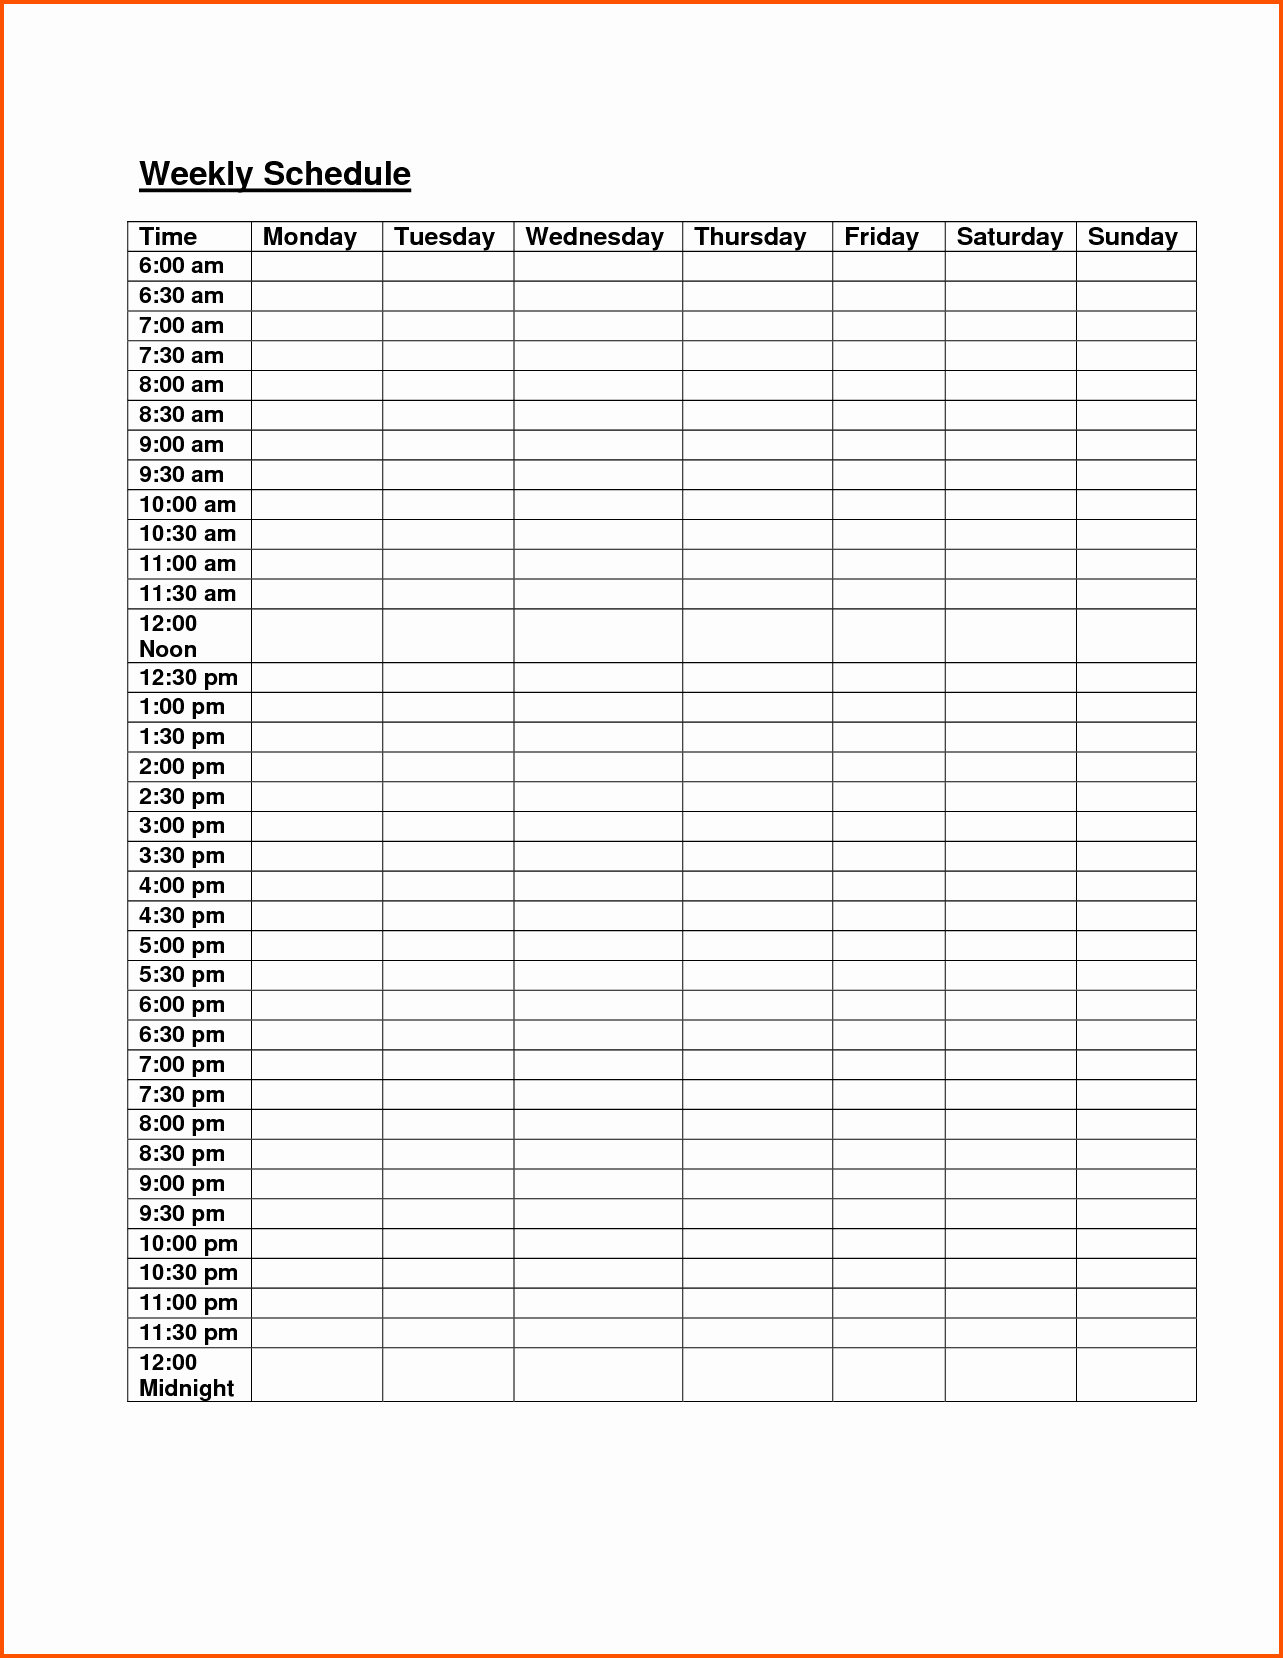 Weekly Schedule Template Printable Unique Free Weekly Class Schedule Template Excel 1